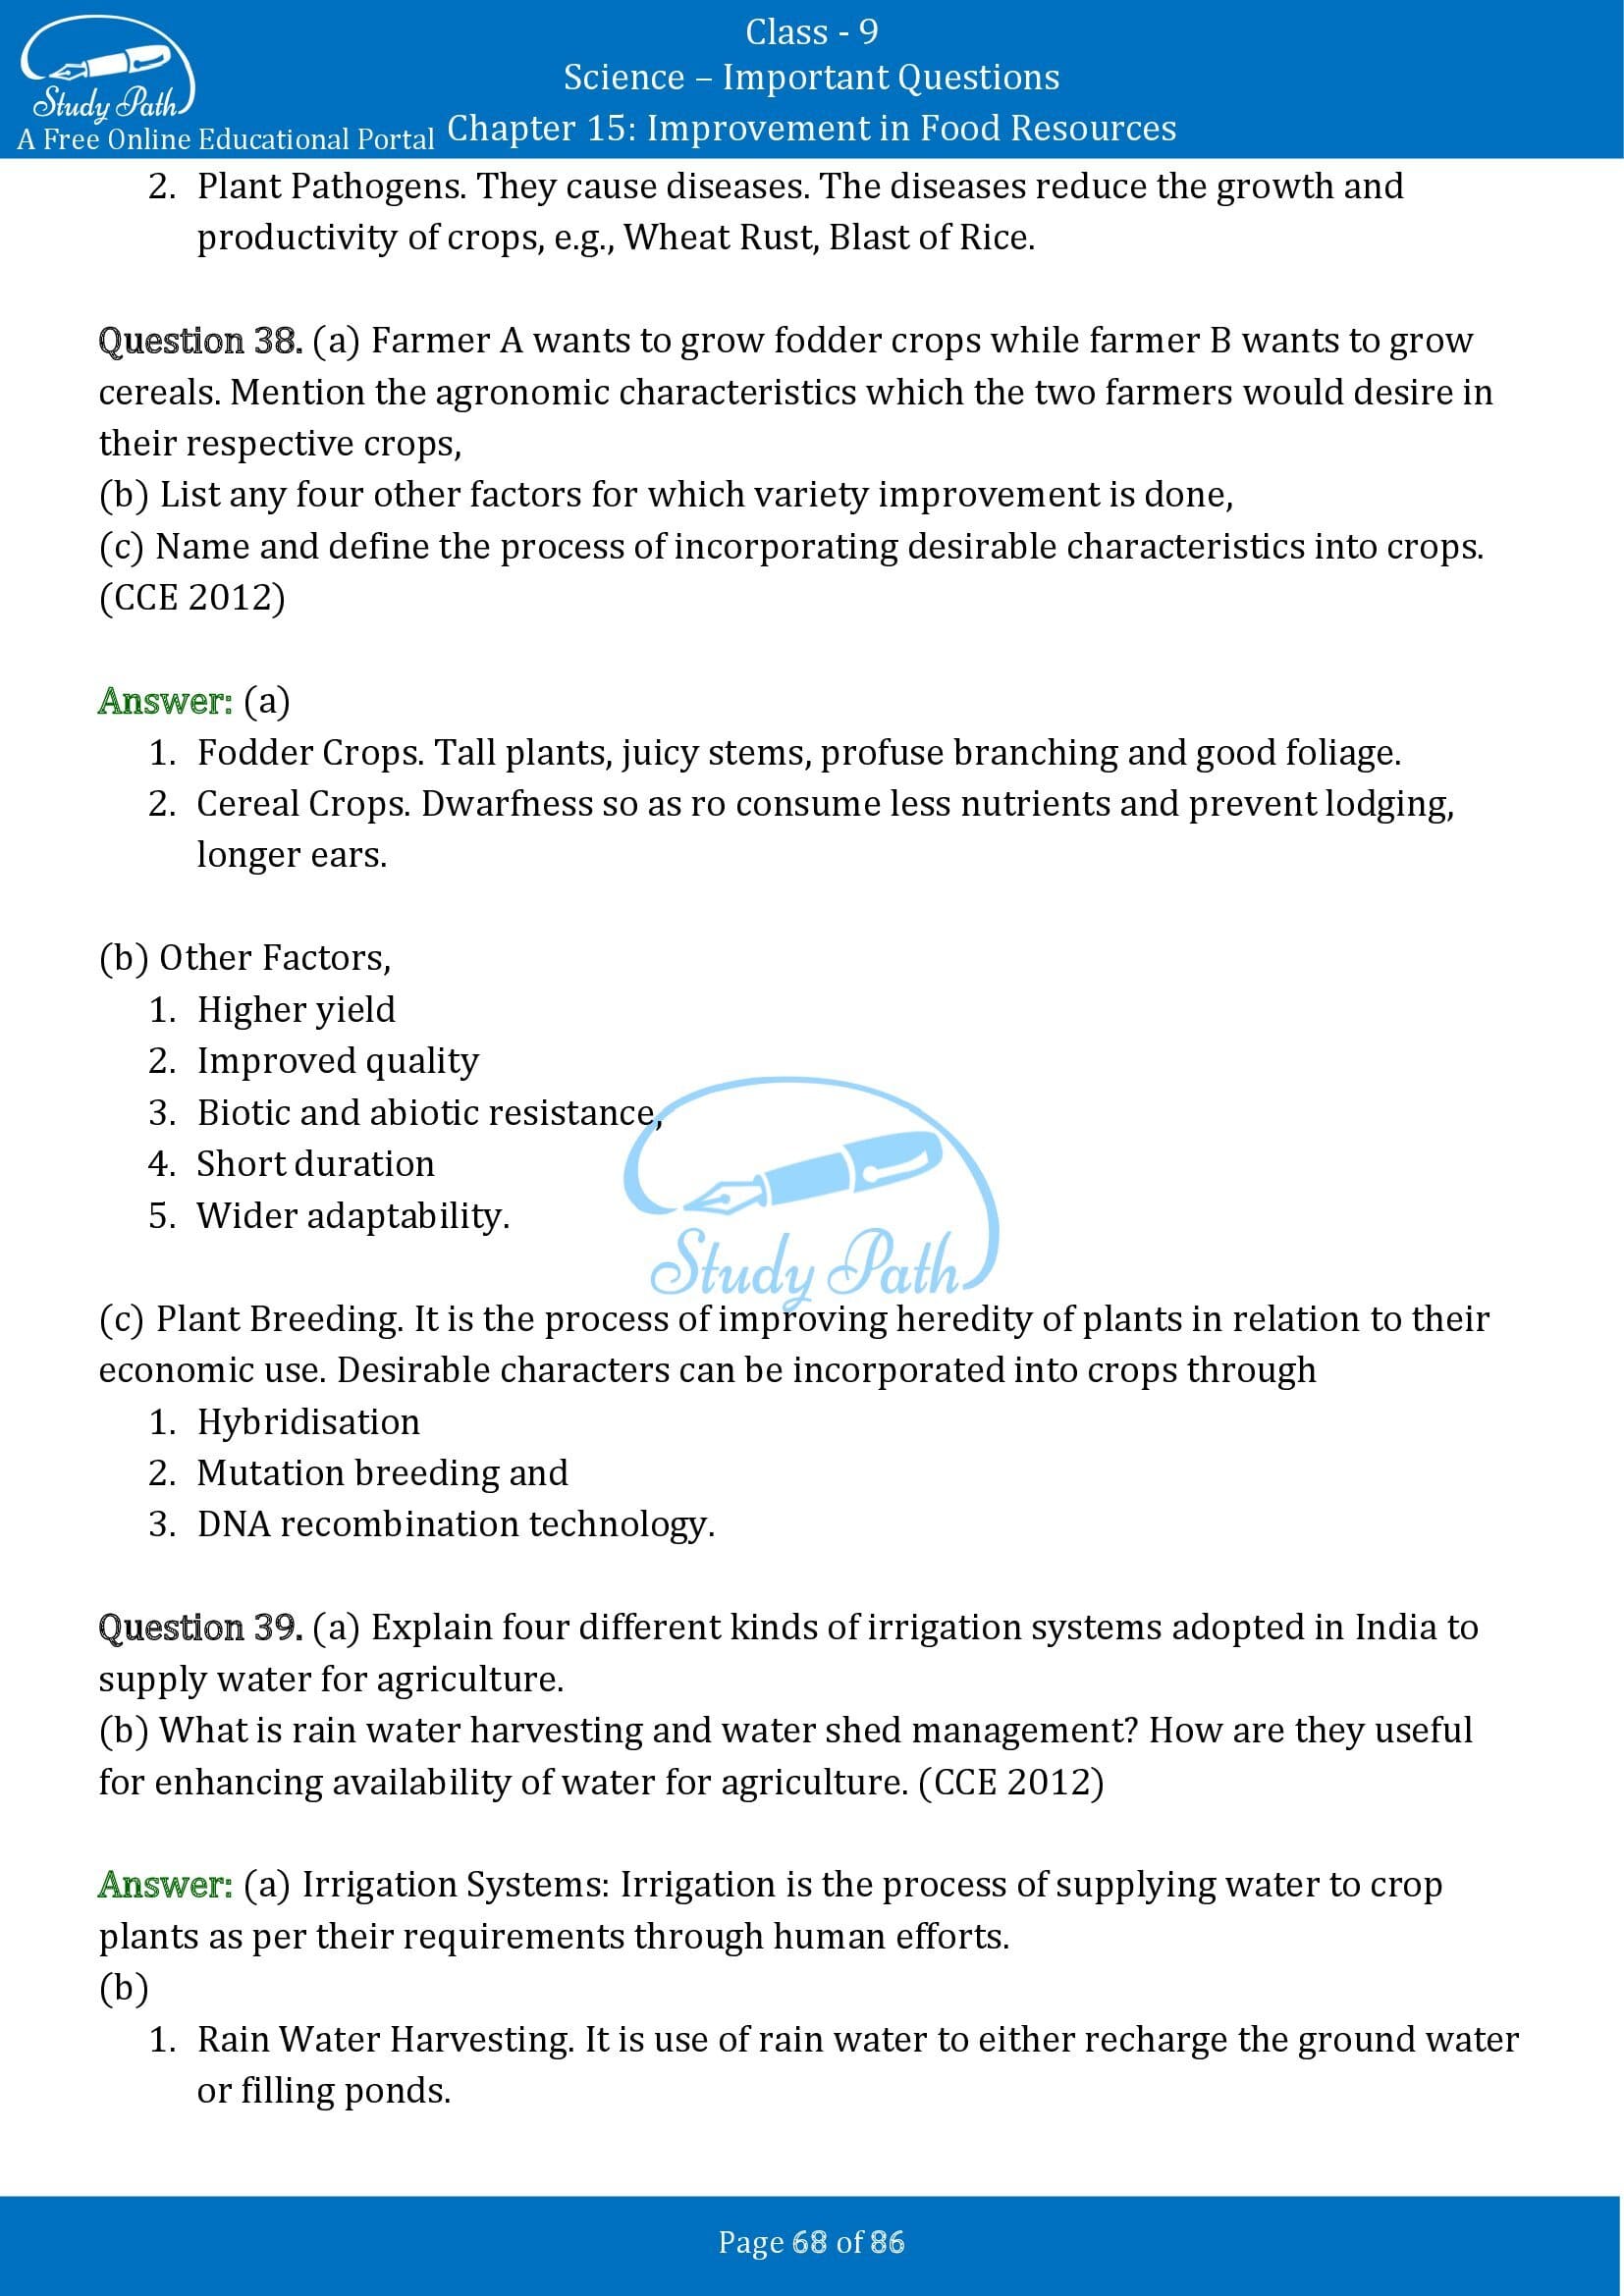 Important Questions for Class 9 Science Chapter 15 Improvement in Food Resources 00068